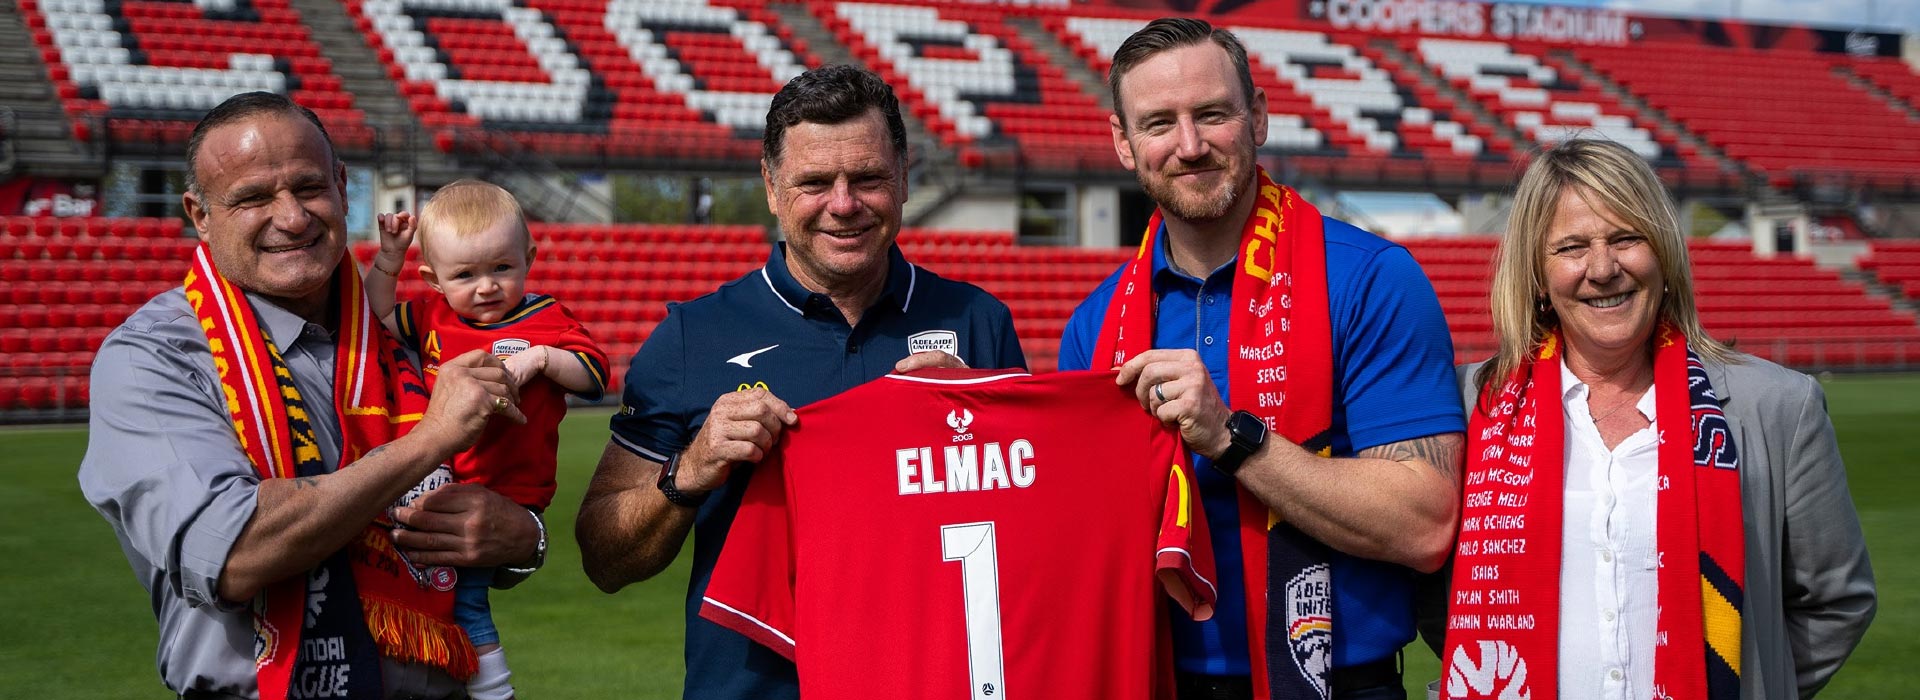 ELMAC is beyond proud to annouce our Gold Partnership with Adelaide United Football Club for the upcoming A-League seasons